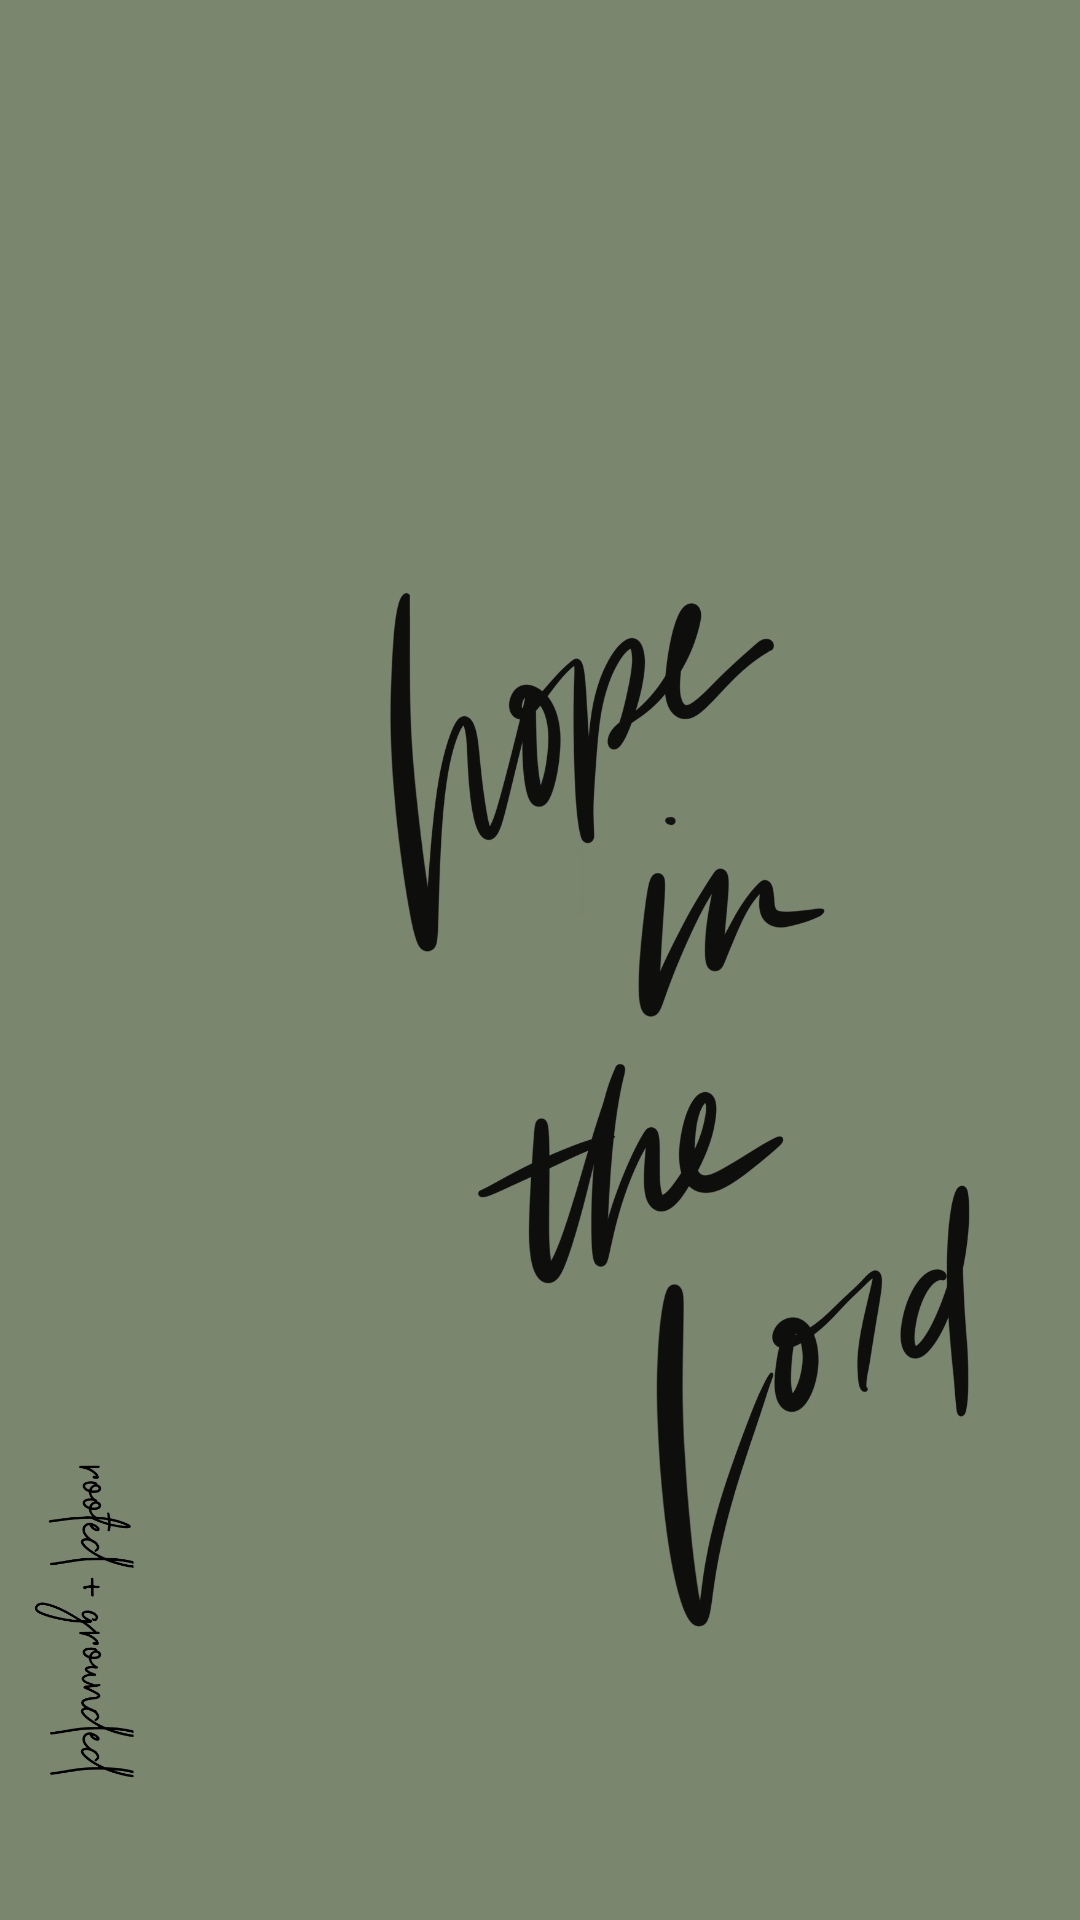 Pretty Christian iPhone Wallpapers  Download Our Collection for Free